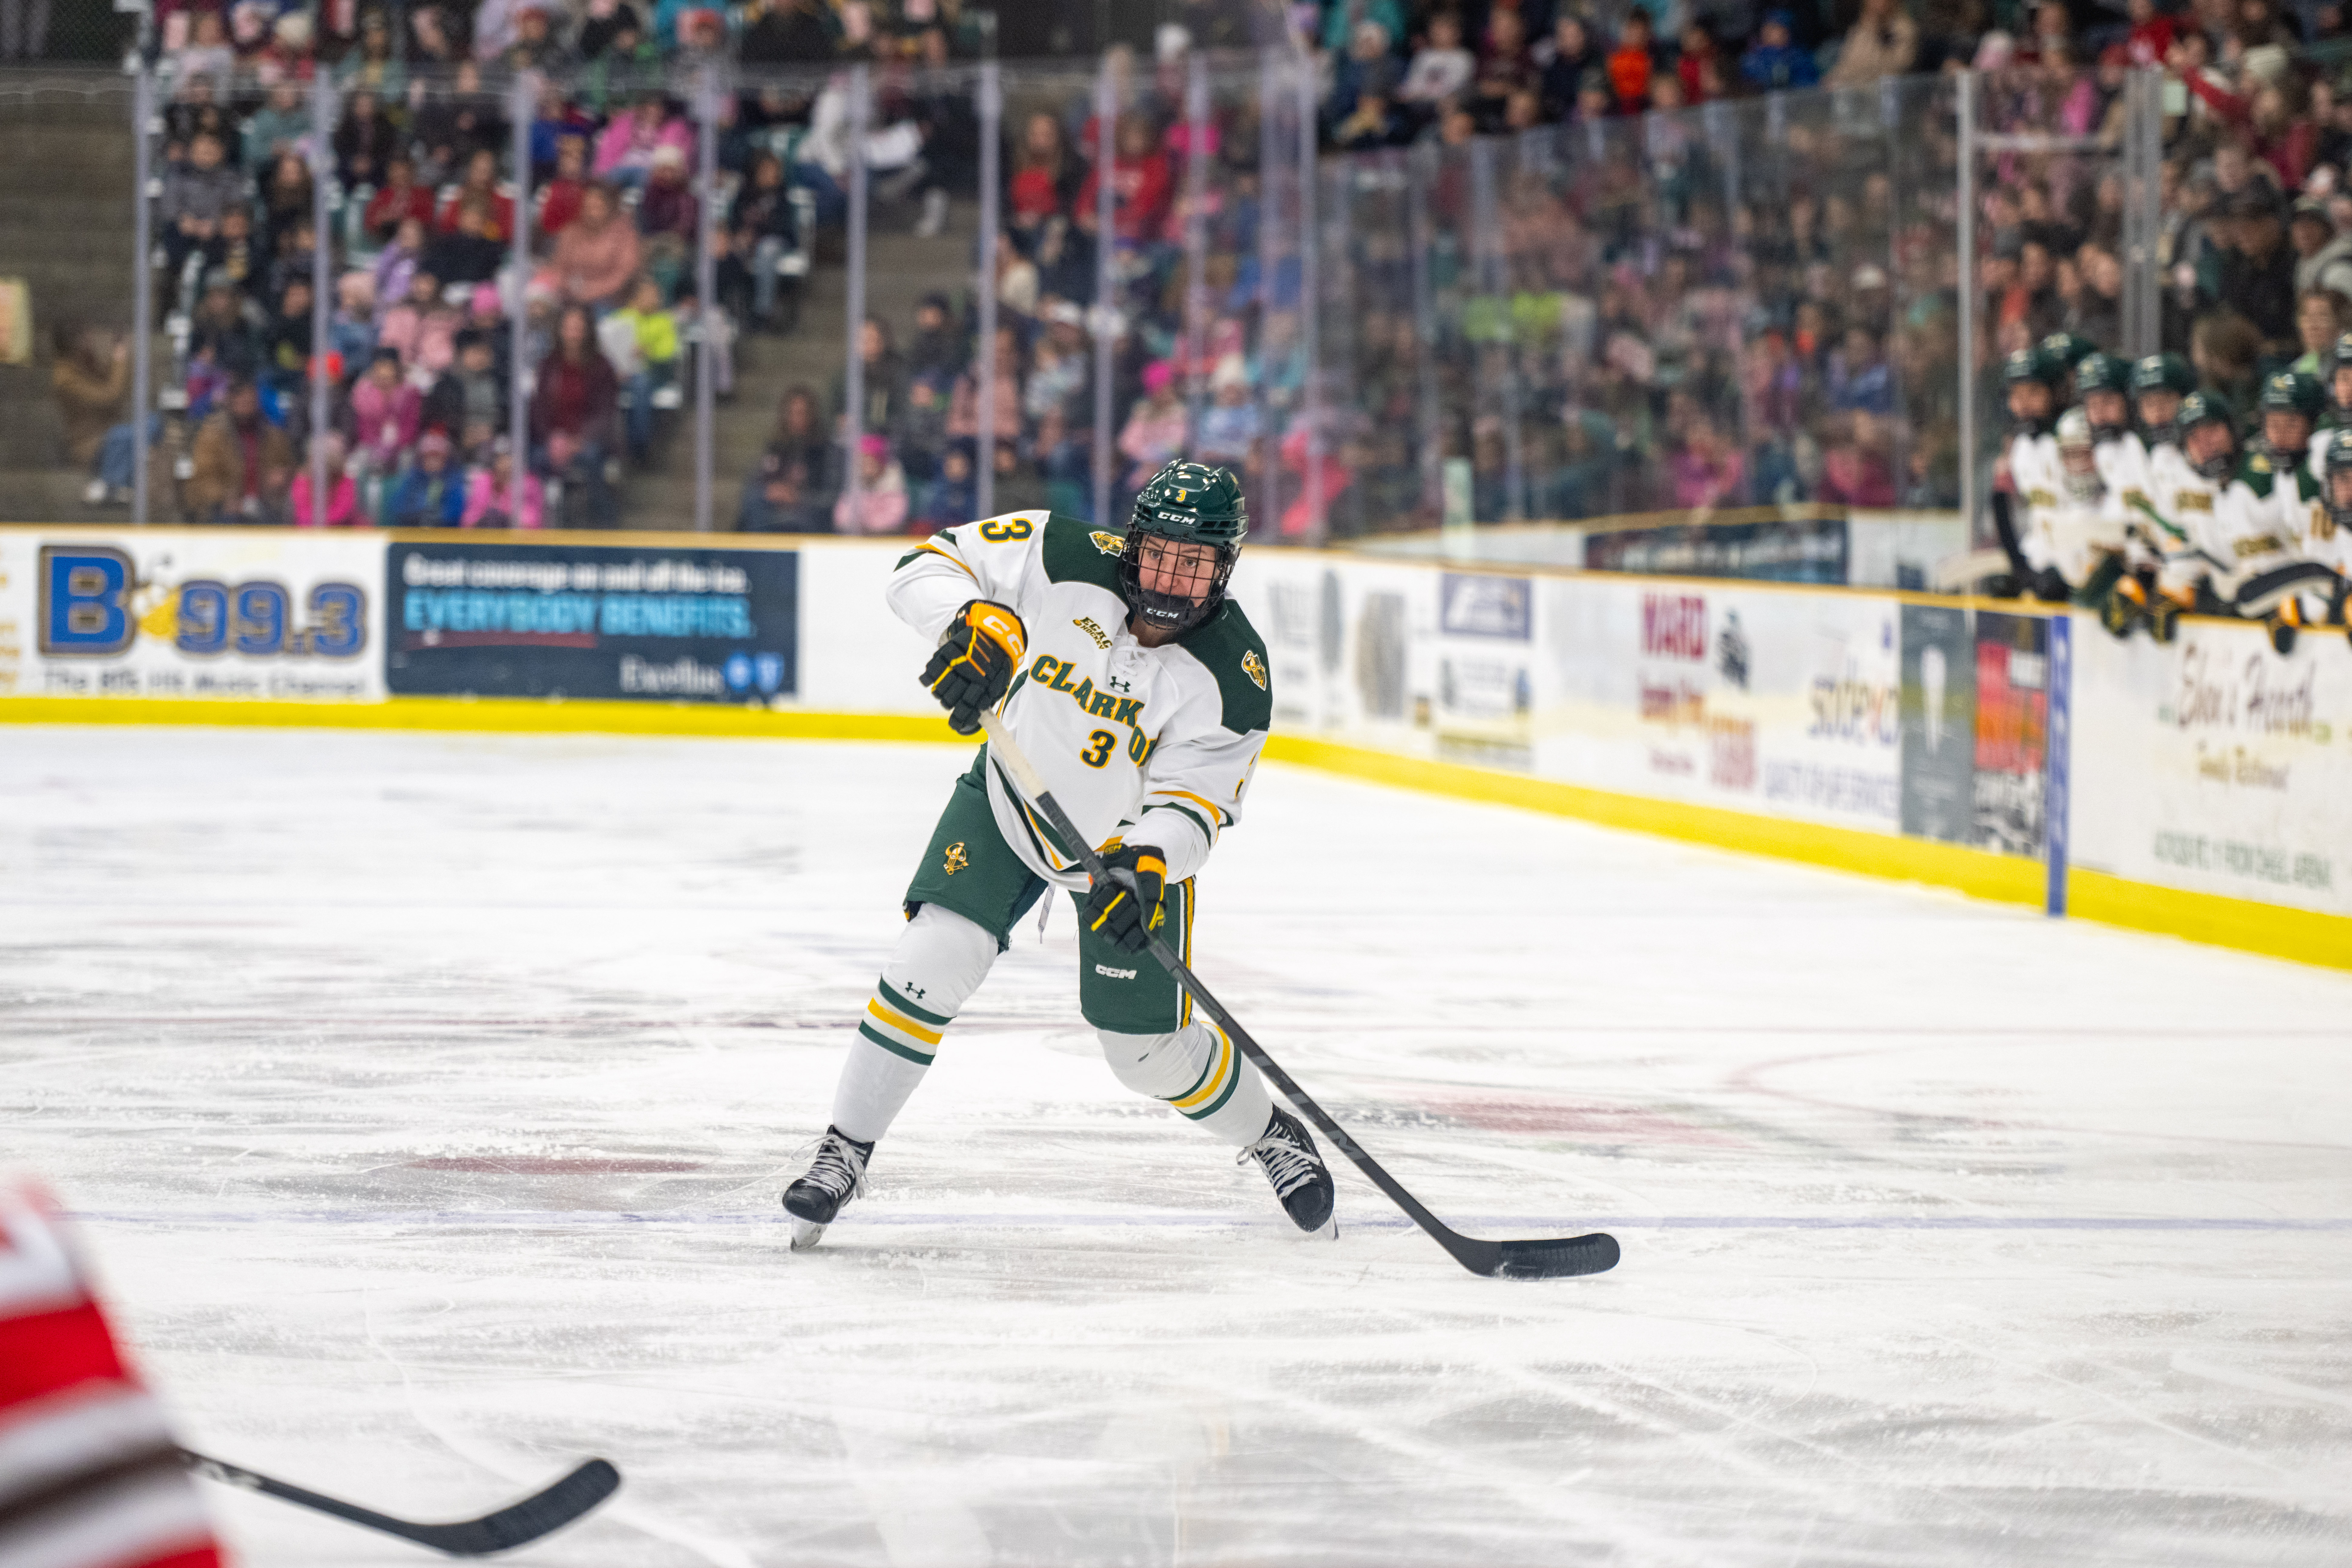 A Clarkson women's hockey player shoots a puck during a game.